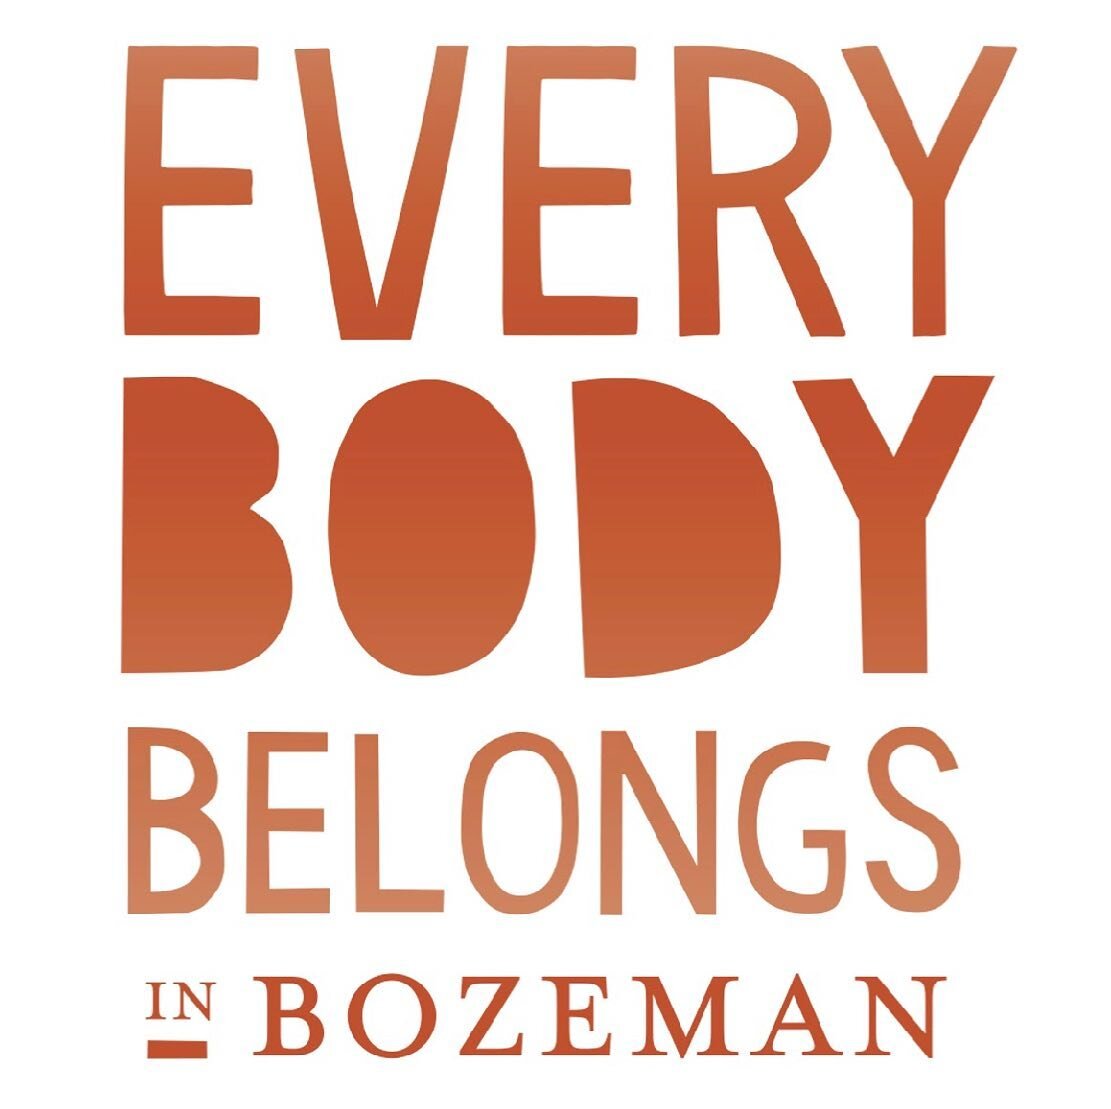 I&rsquo;m so excited to be partnering with @eatingdisordercentermt for my Summer Skin Workshop on Thursday! 
#everyBODYbelongsinbozeman is a reminder that all bodies deserve respect, care, and nourishment - no matter what🙌🏼

Any BeautyCounter order